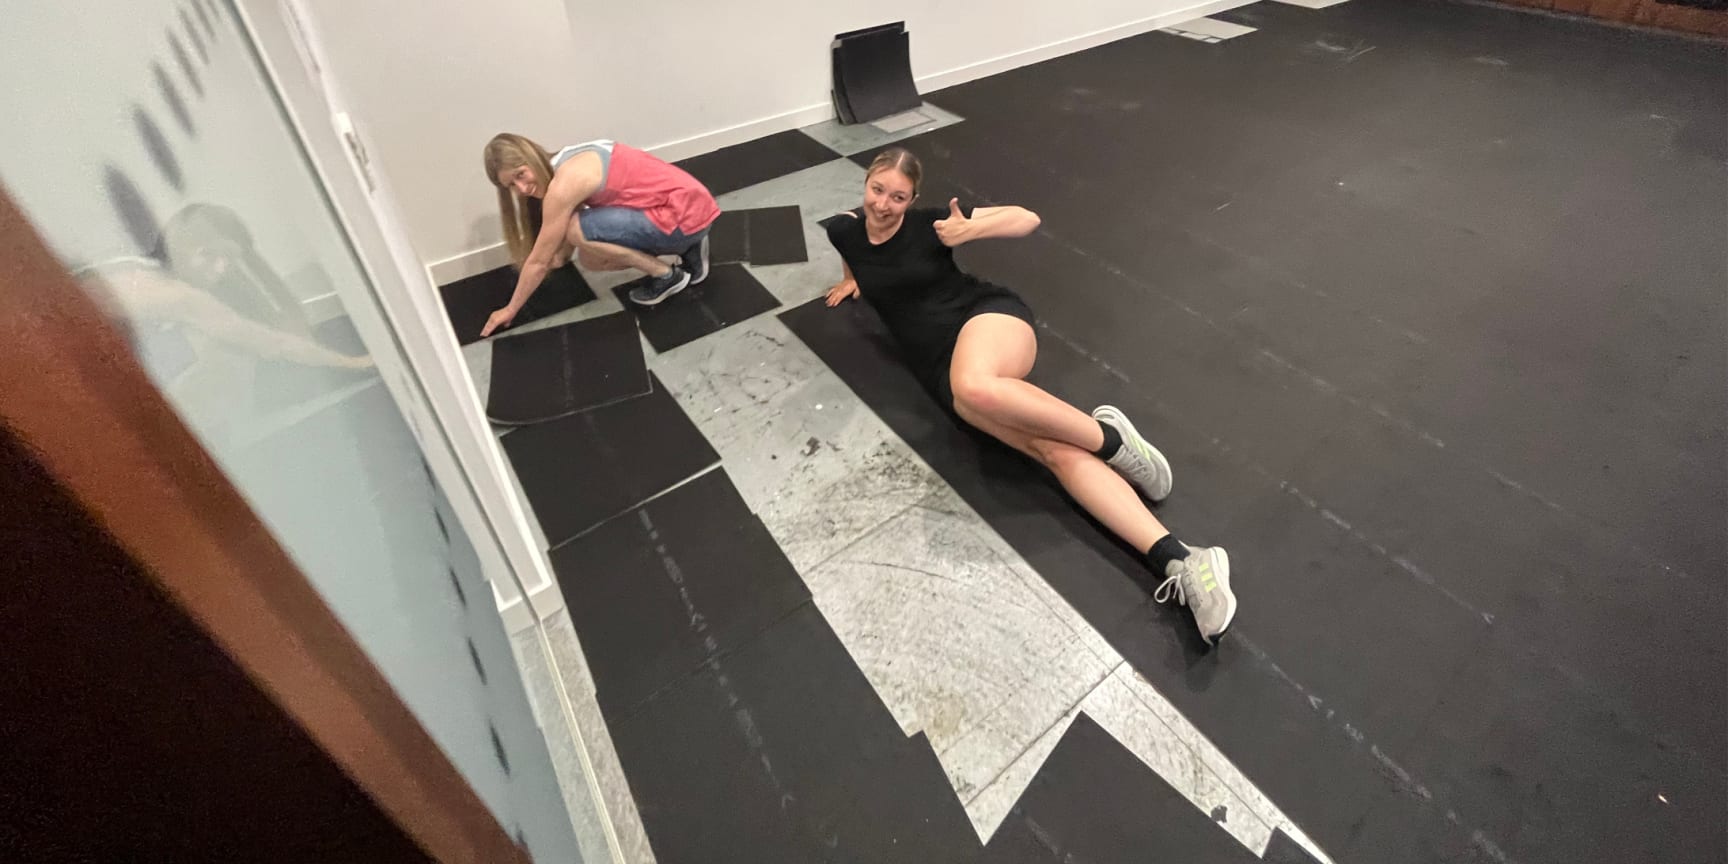 Two white women smile at the camera and lay down dance floor tiles. One poses with her leg in the air.